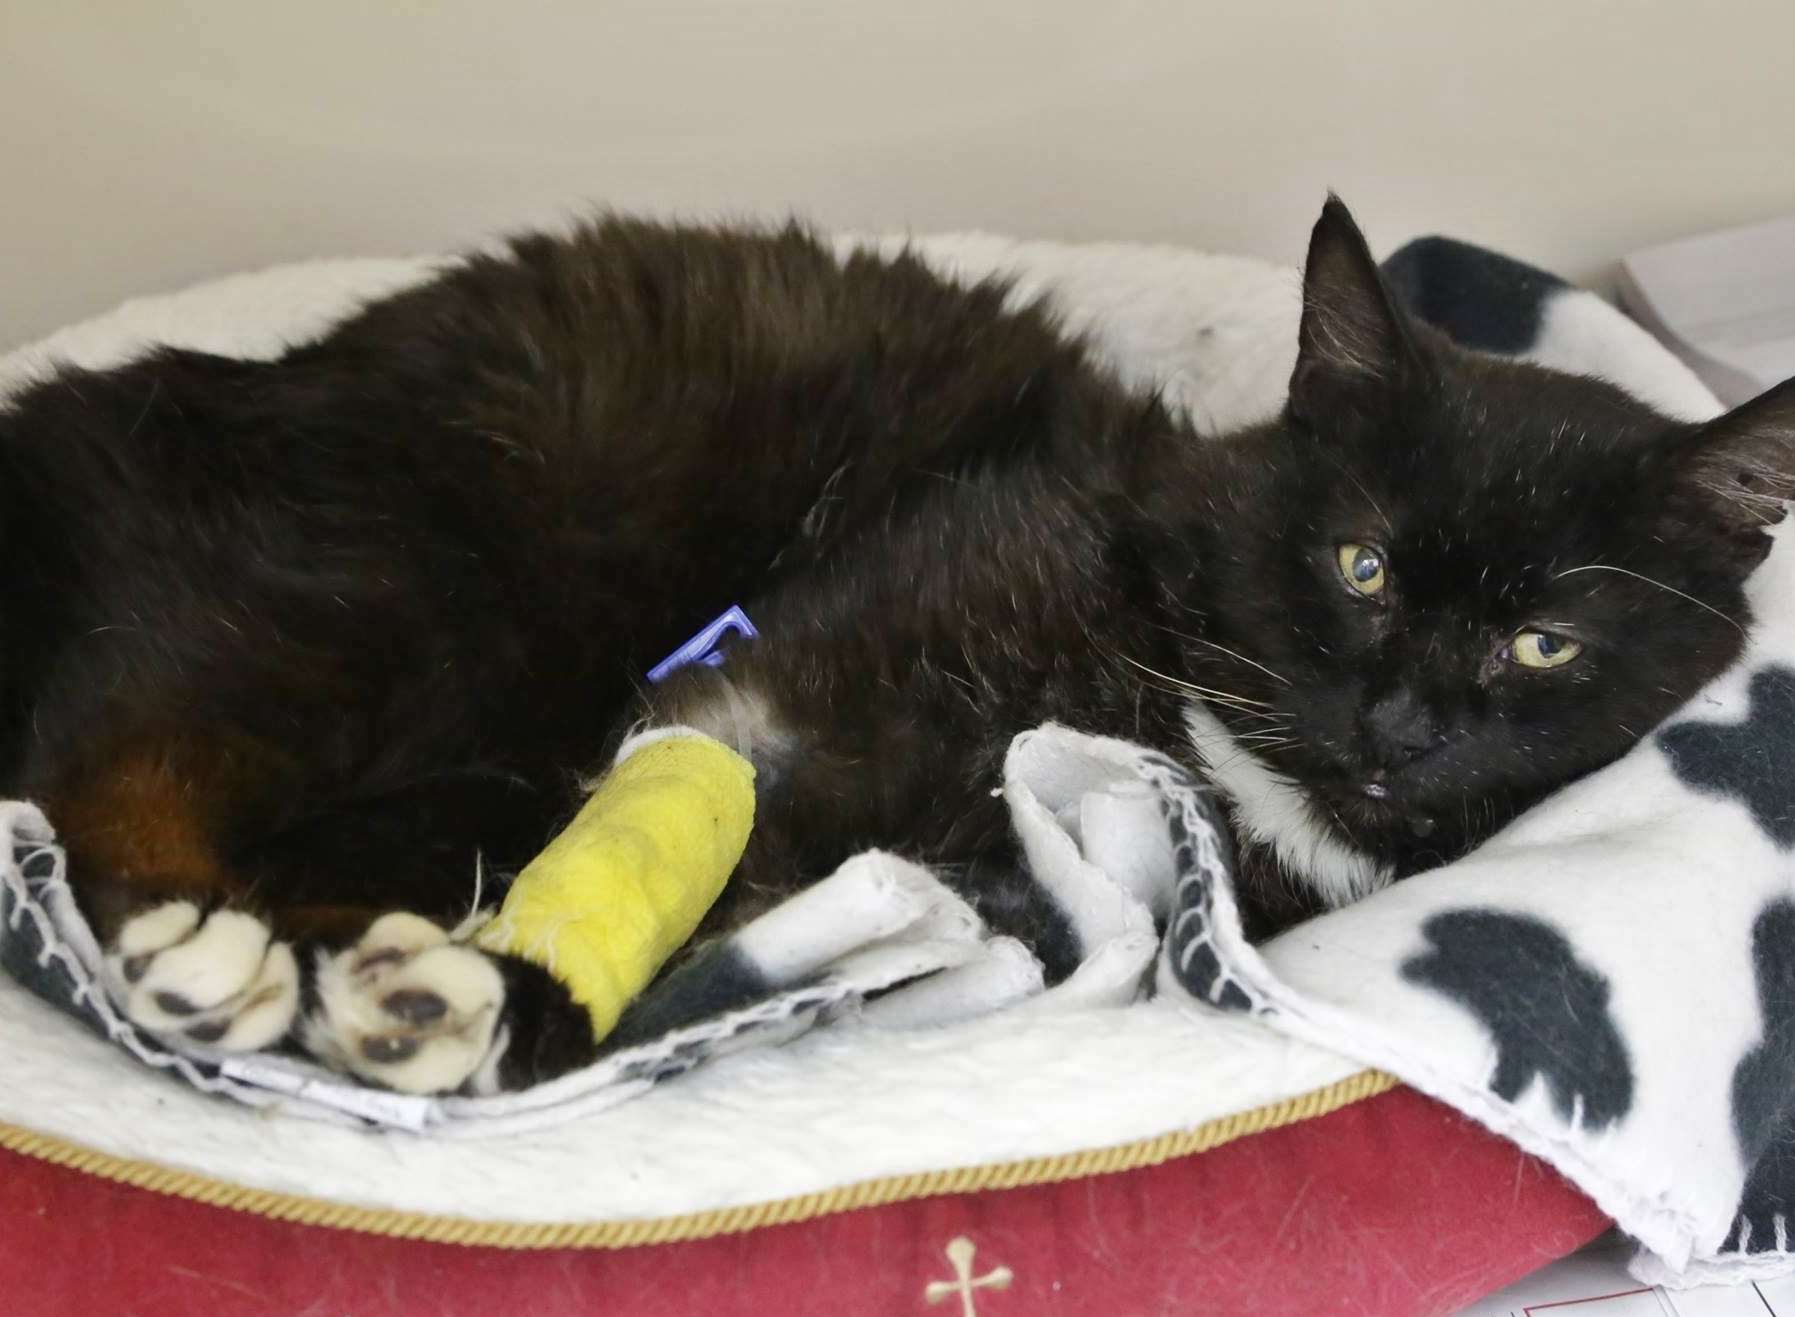 A badly limping stray was saved by two cat lovers